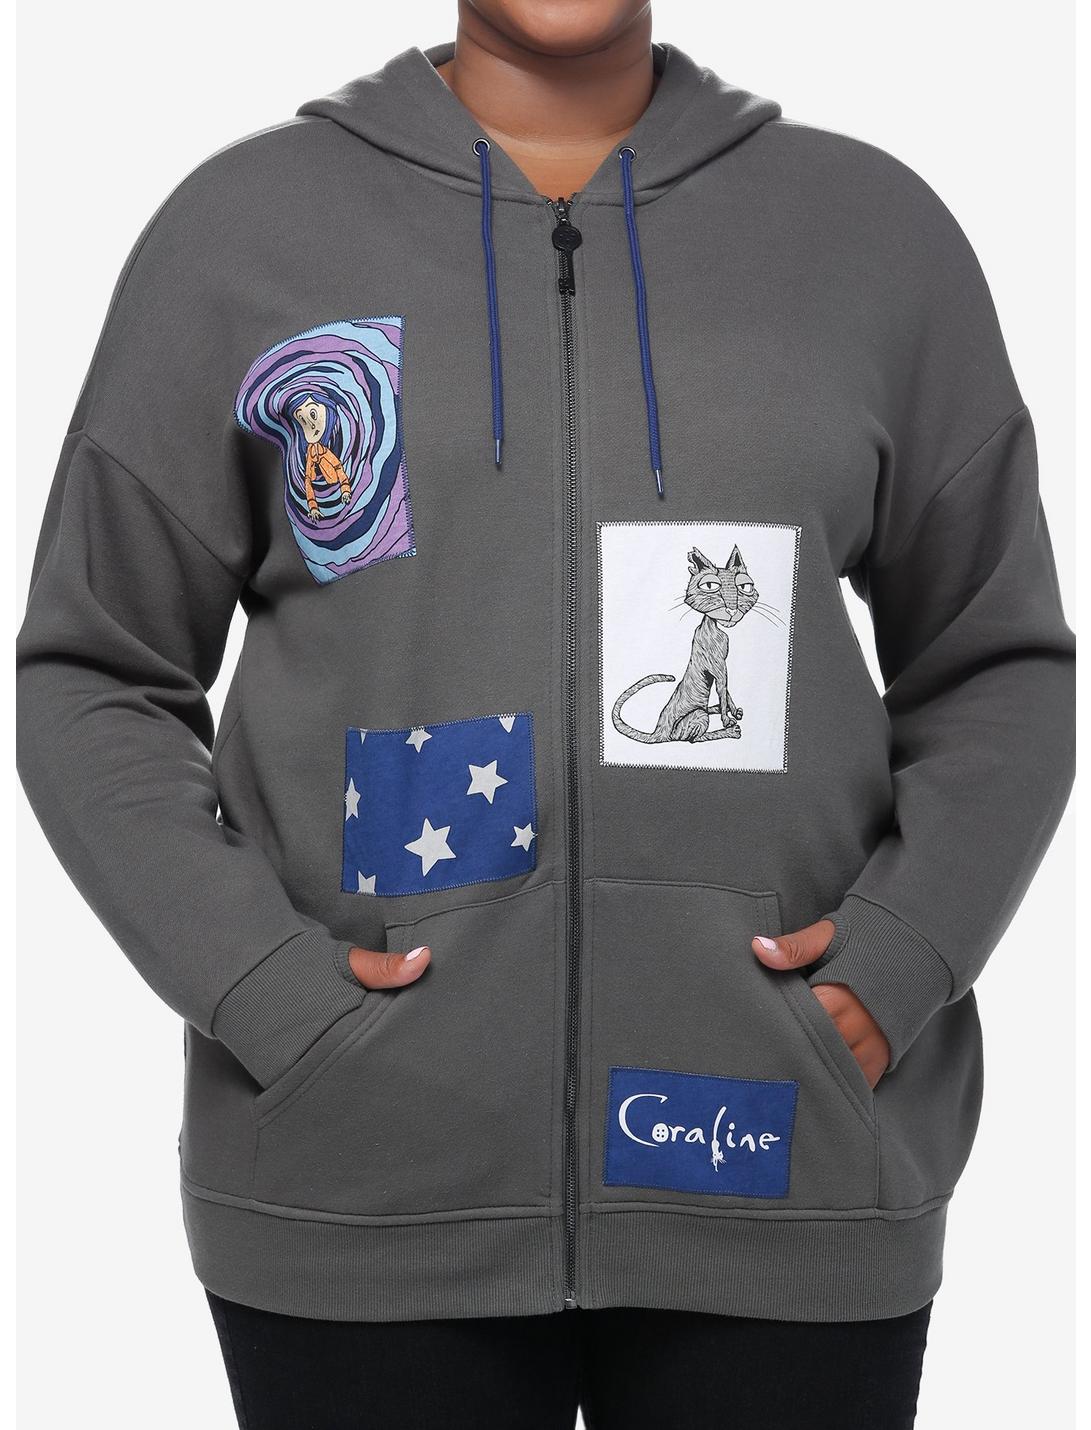 Coraline Patch Girls Oversized Hoodie Plus Size, MULTI, hi-res